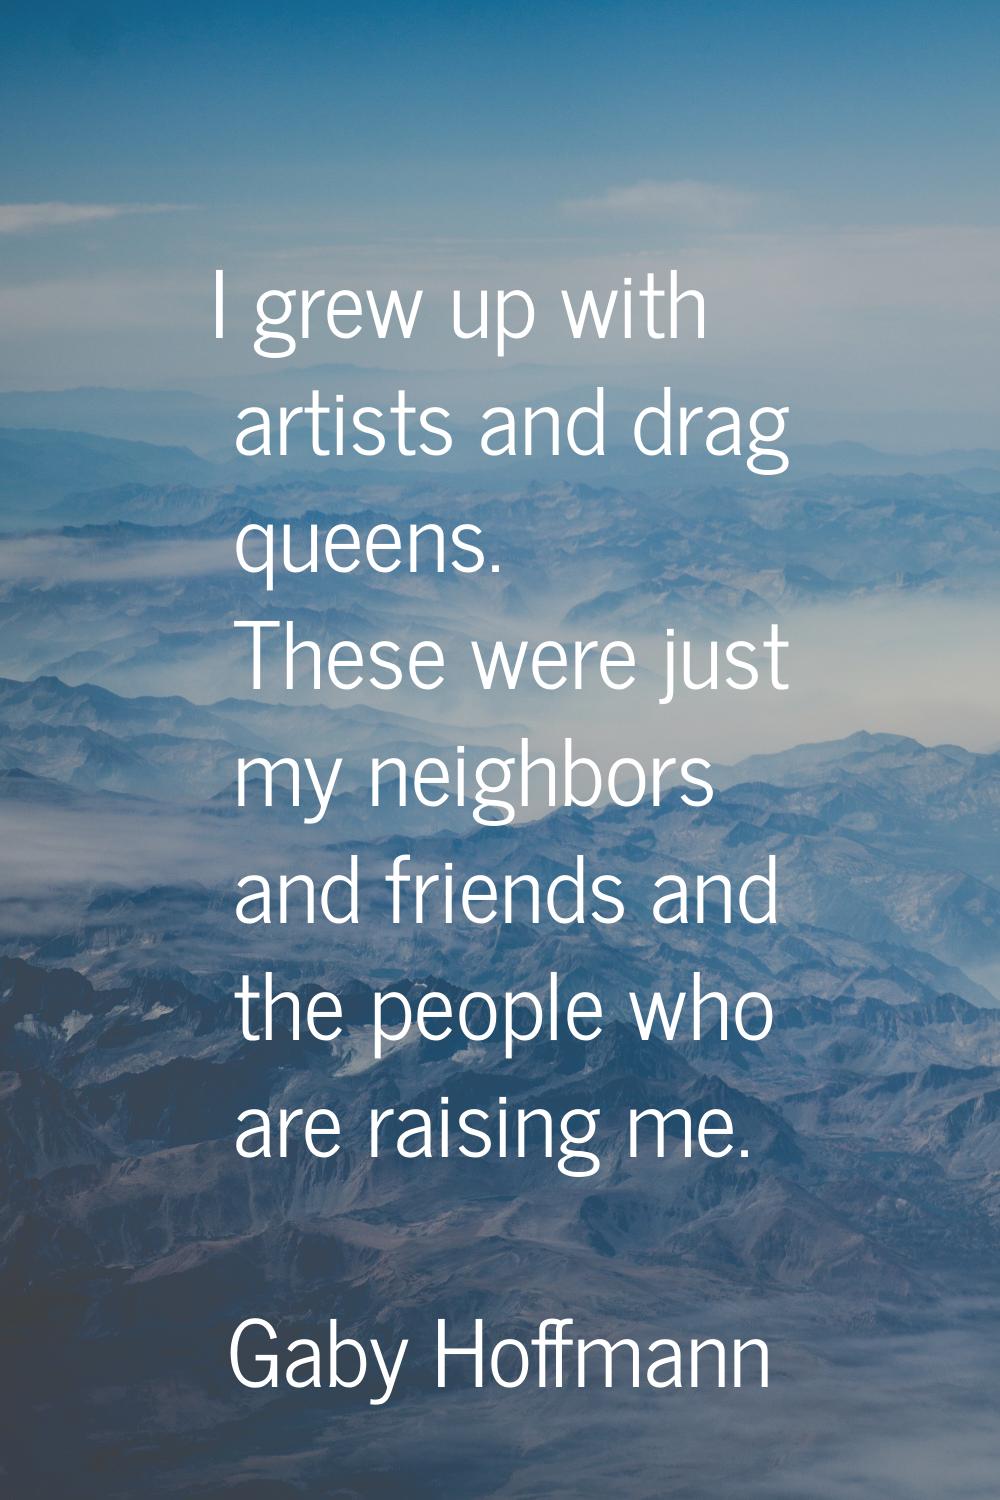 I grew up with artists and drag queens. These were just my neighbors and friends and the people who